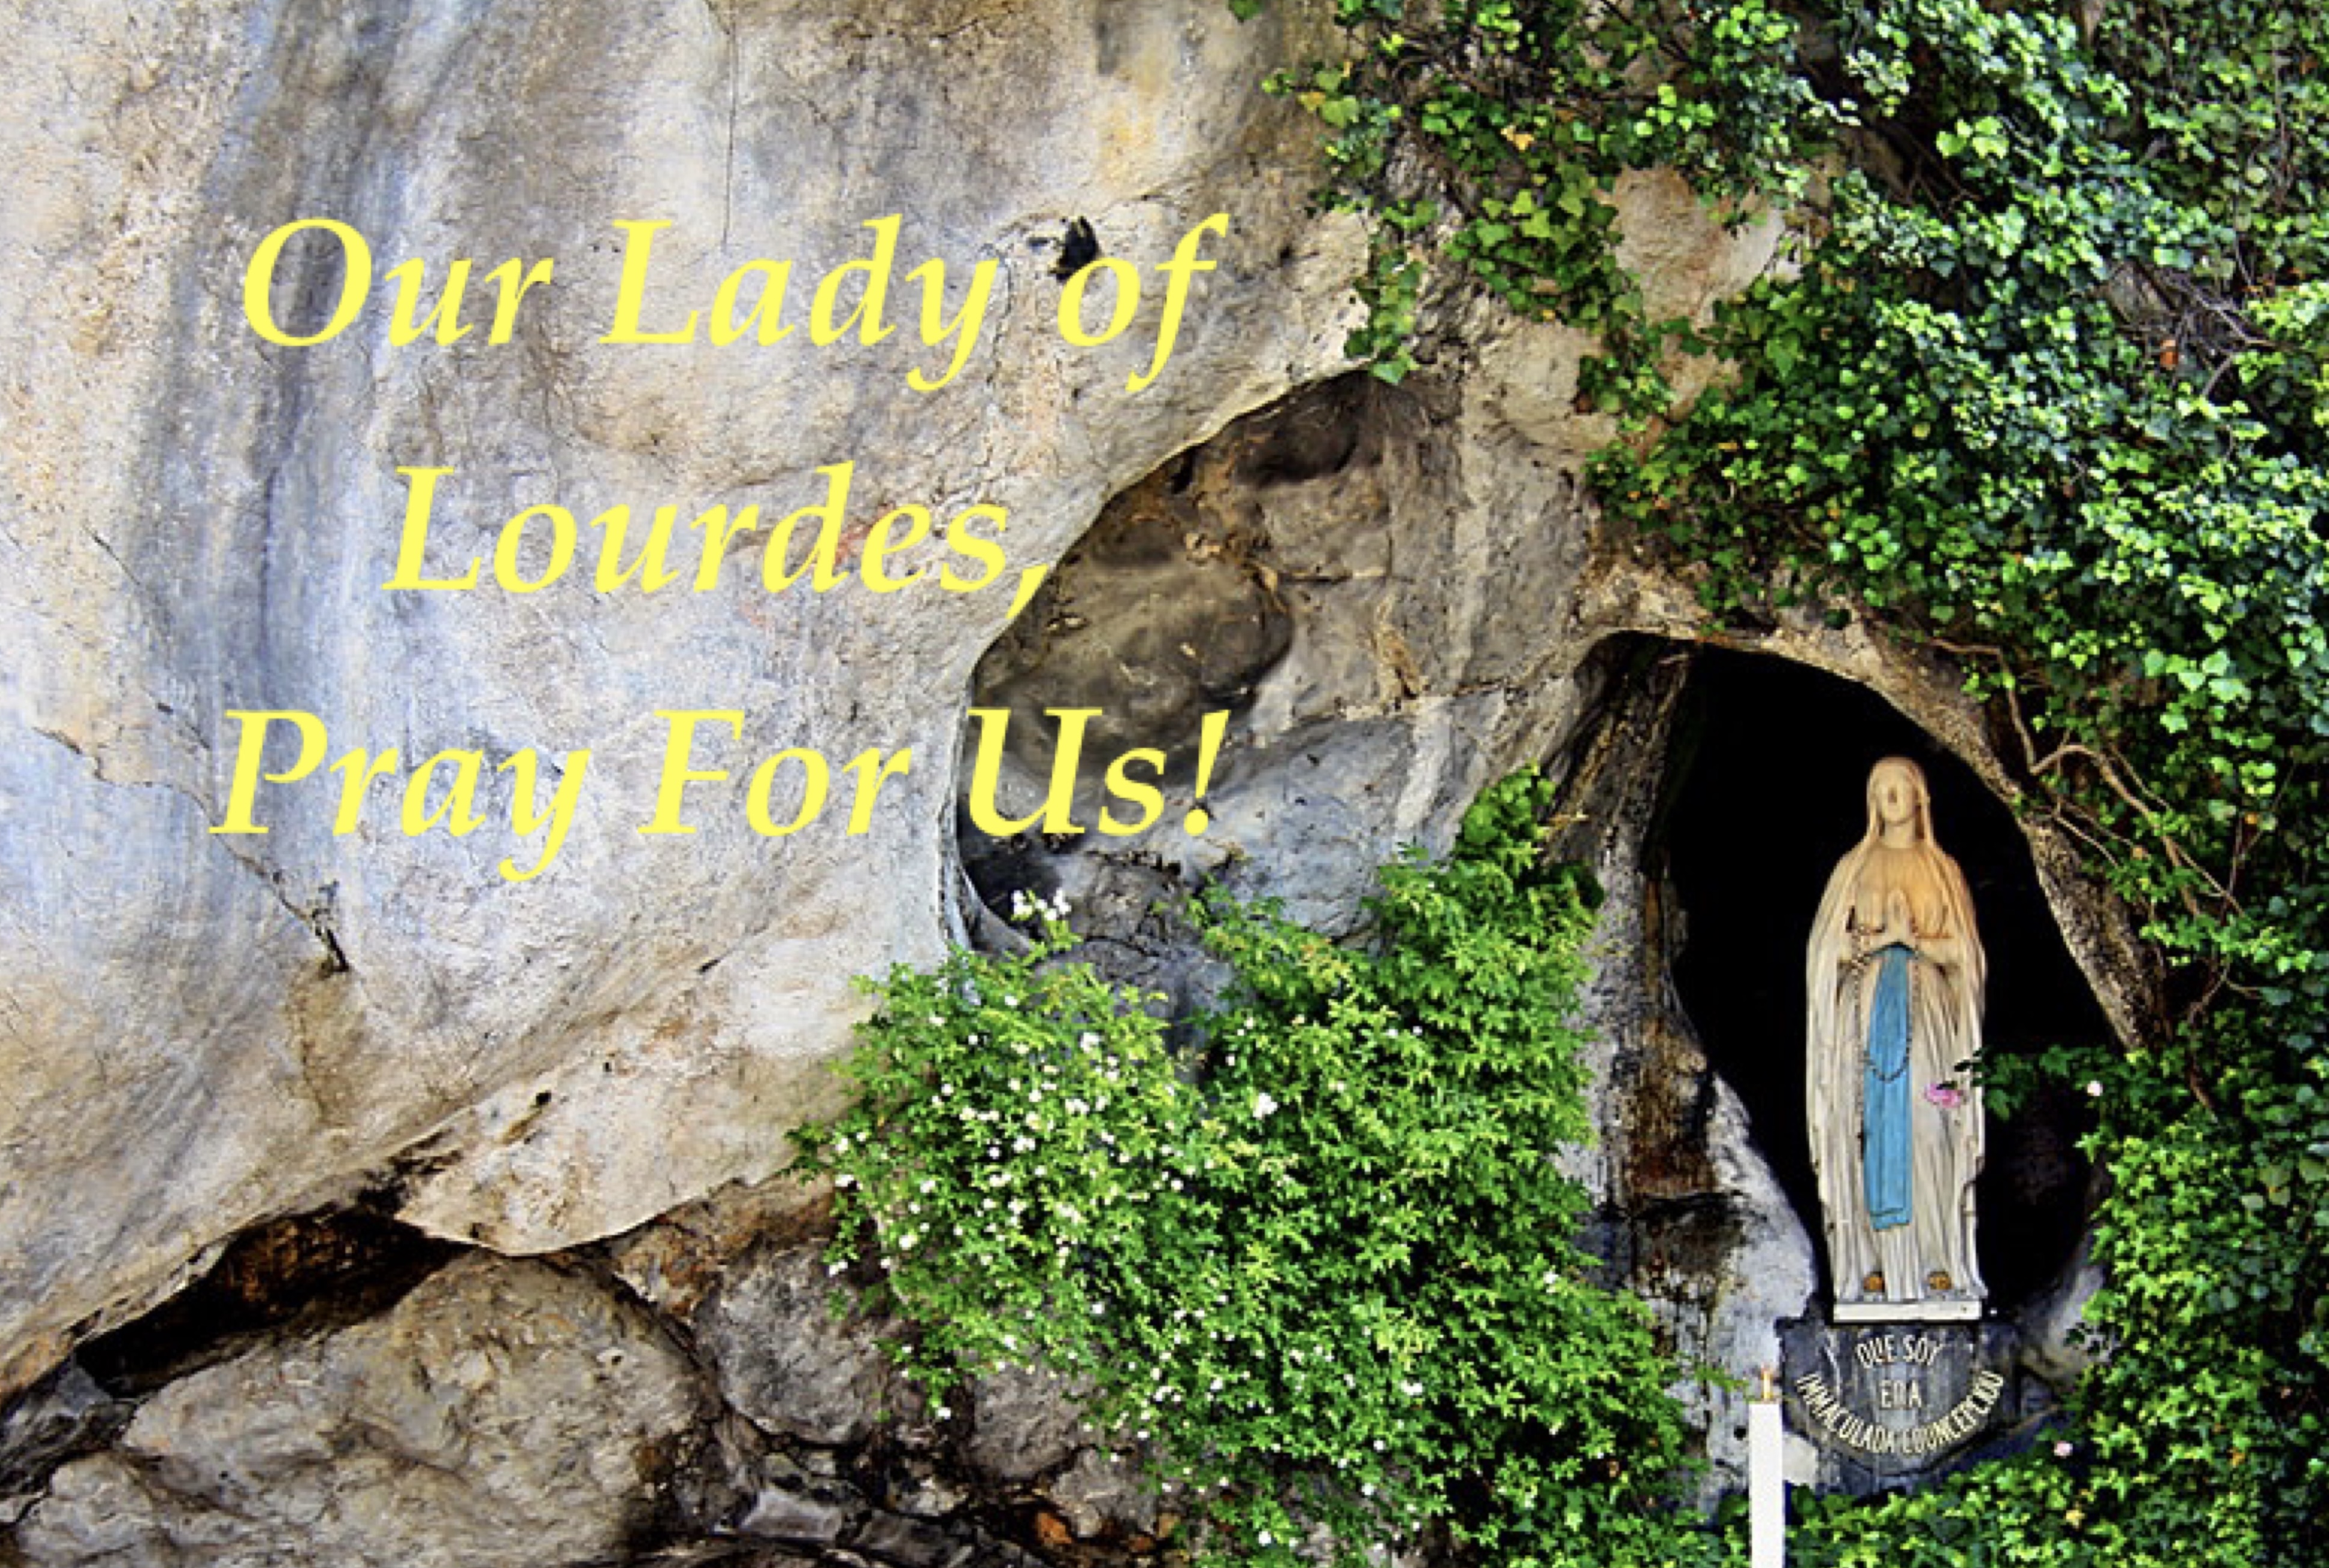 11th February - Our Lady of Lourdes